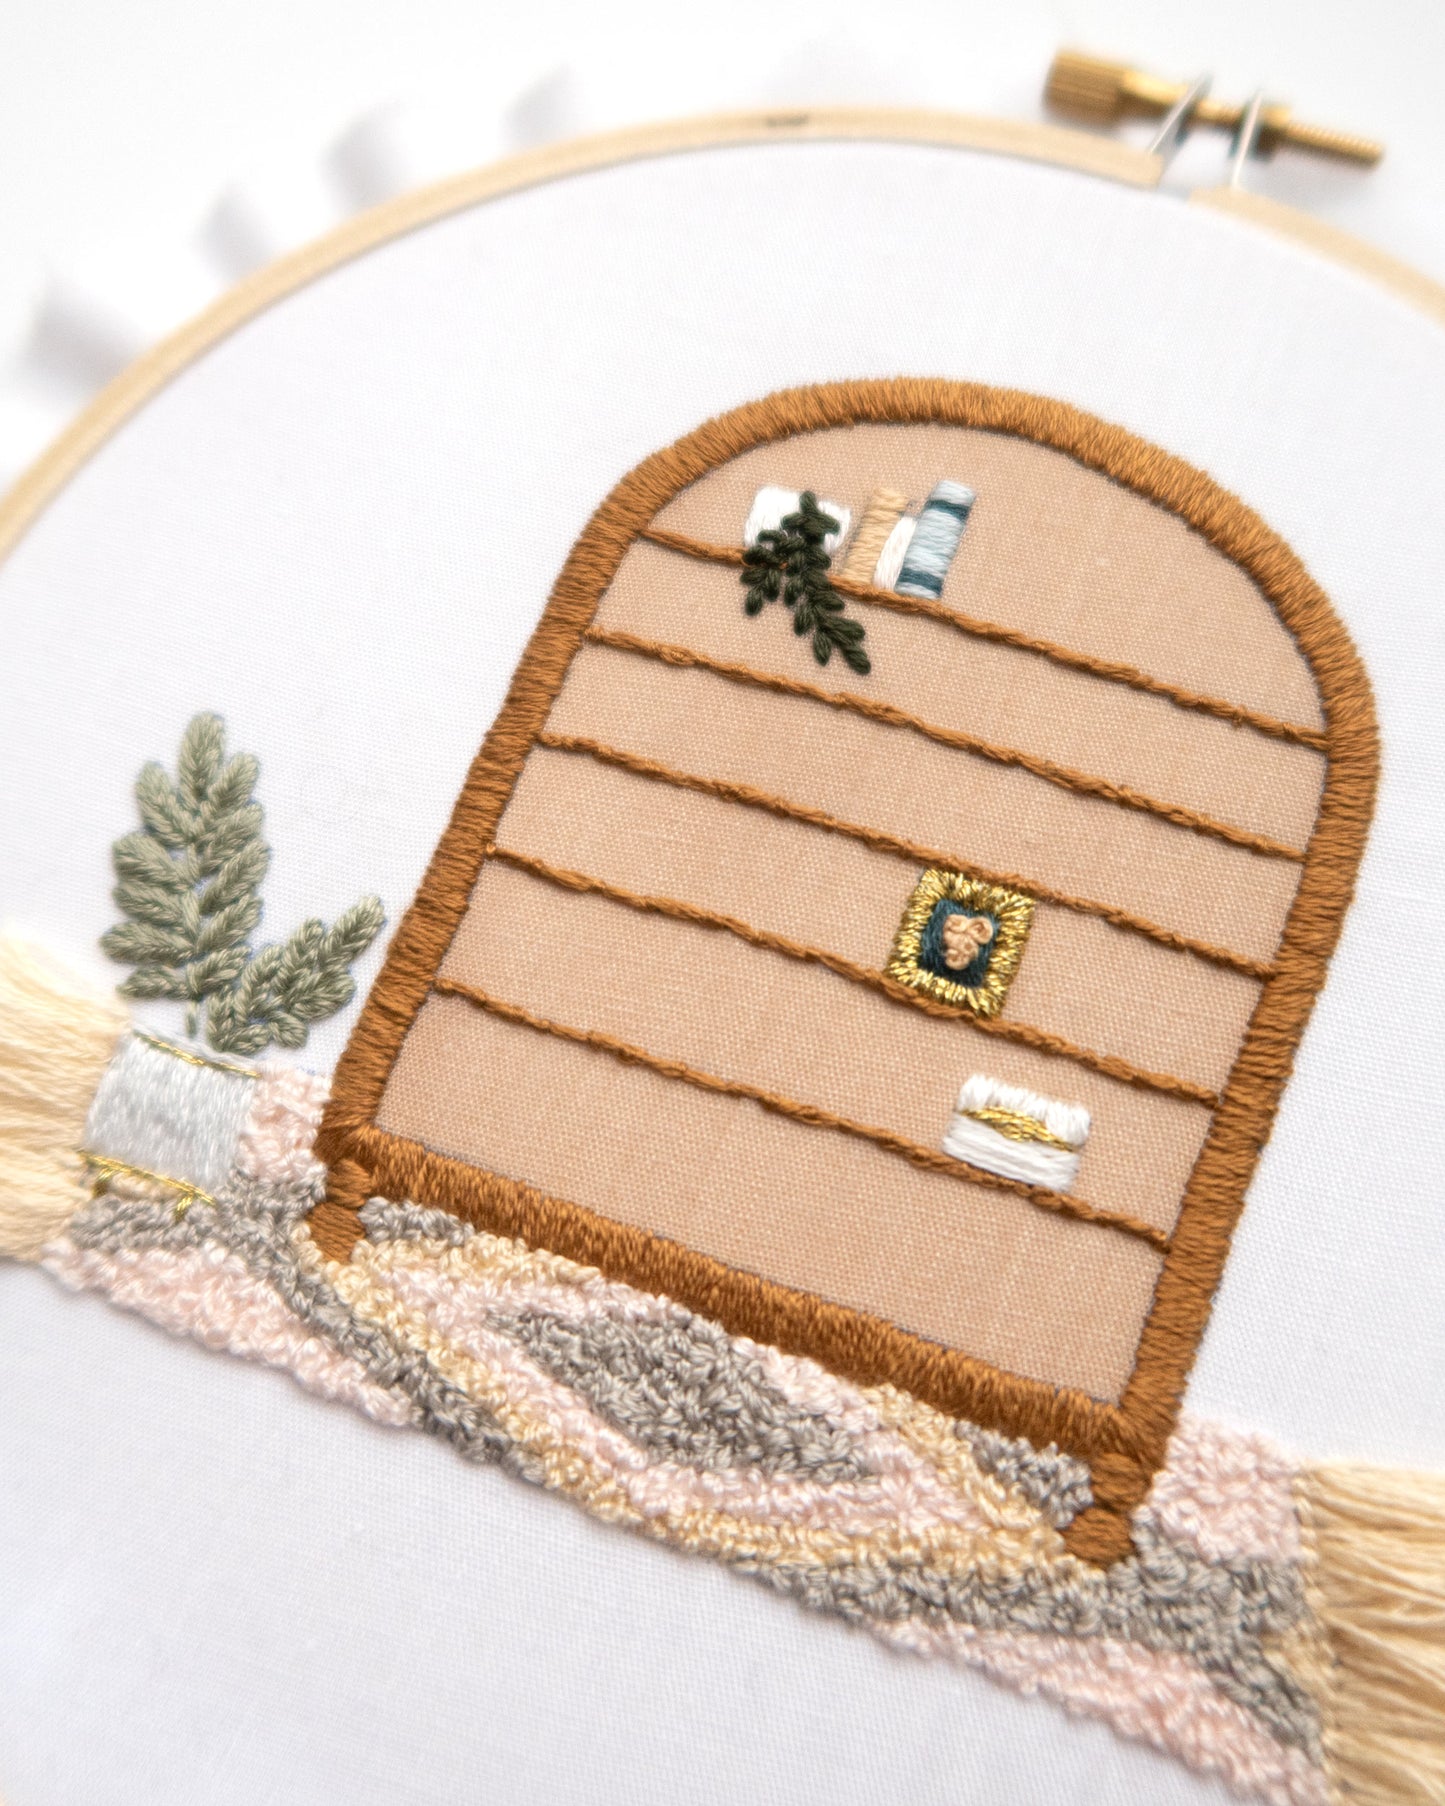 Books are Magic Embroidery Pattern – Emily June